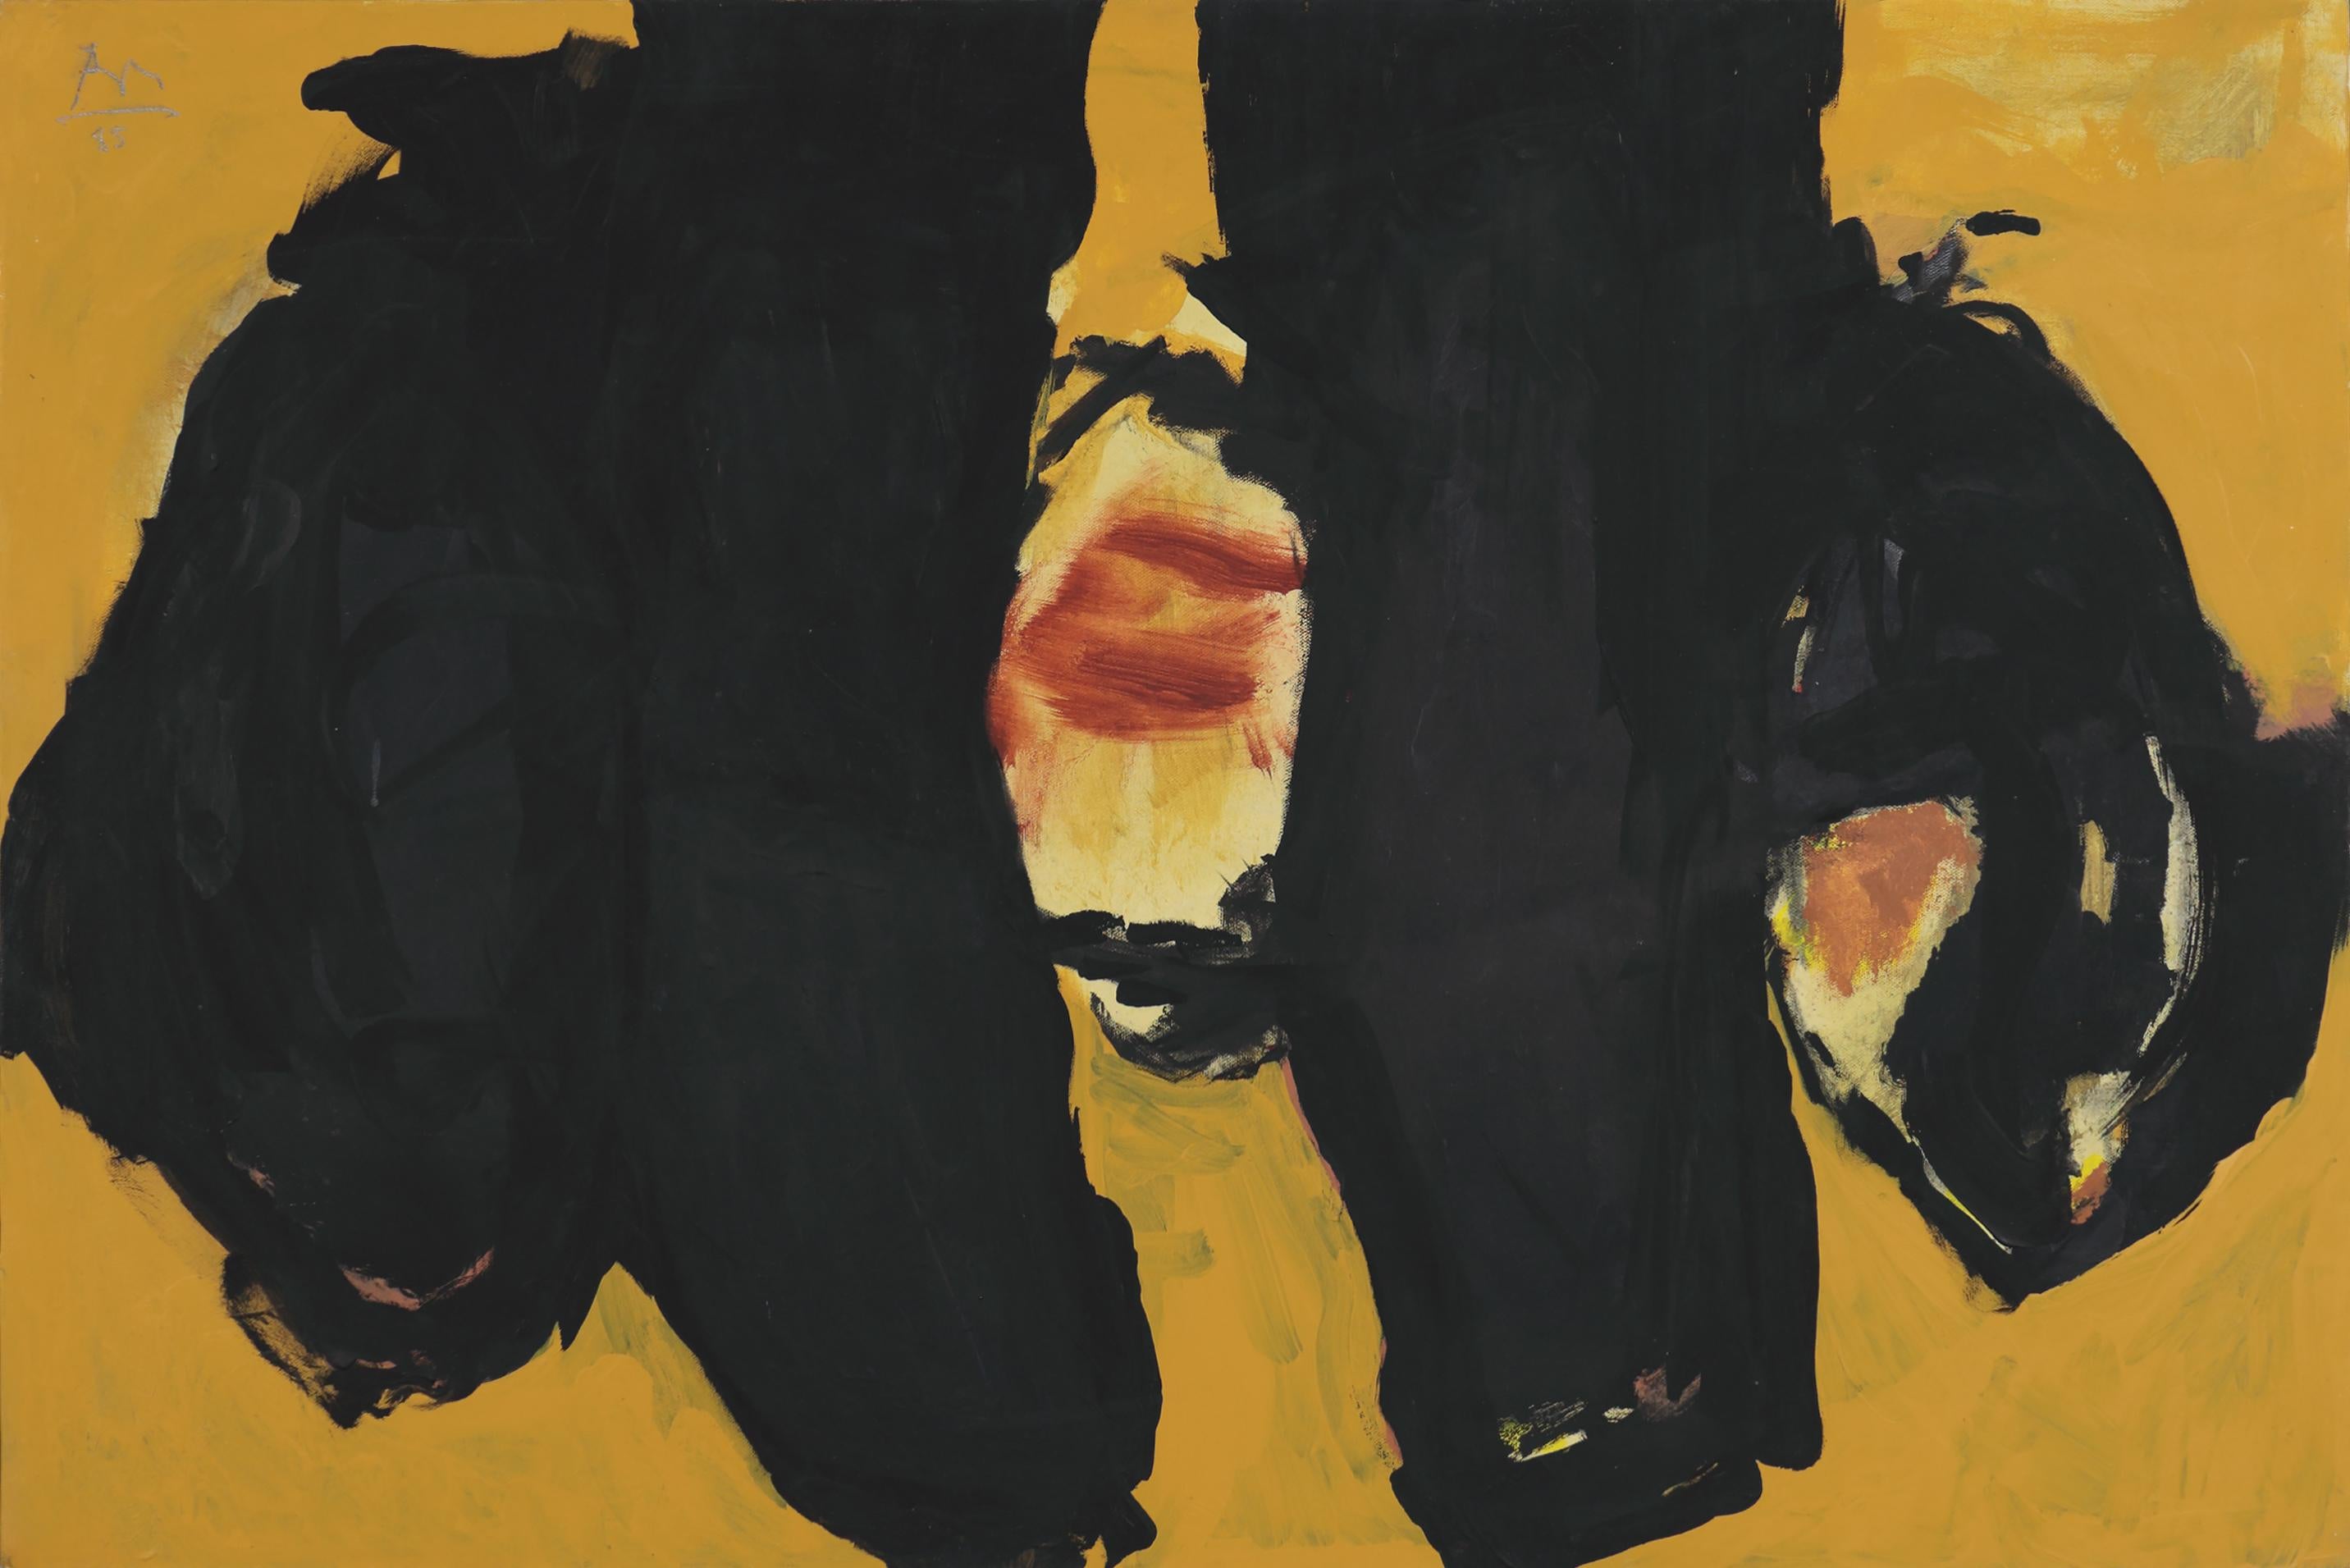 Abstract Painting Robert Motherwell - Hommage à la Catalogne